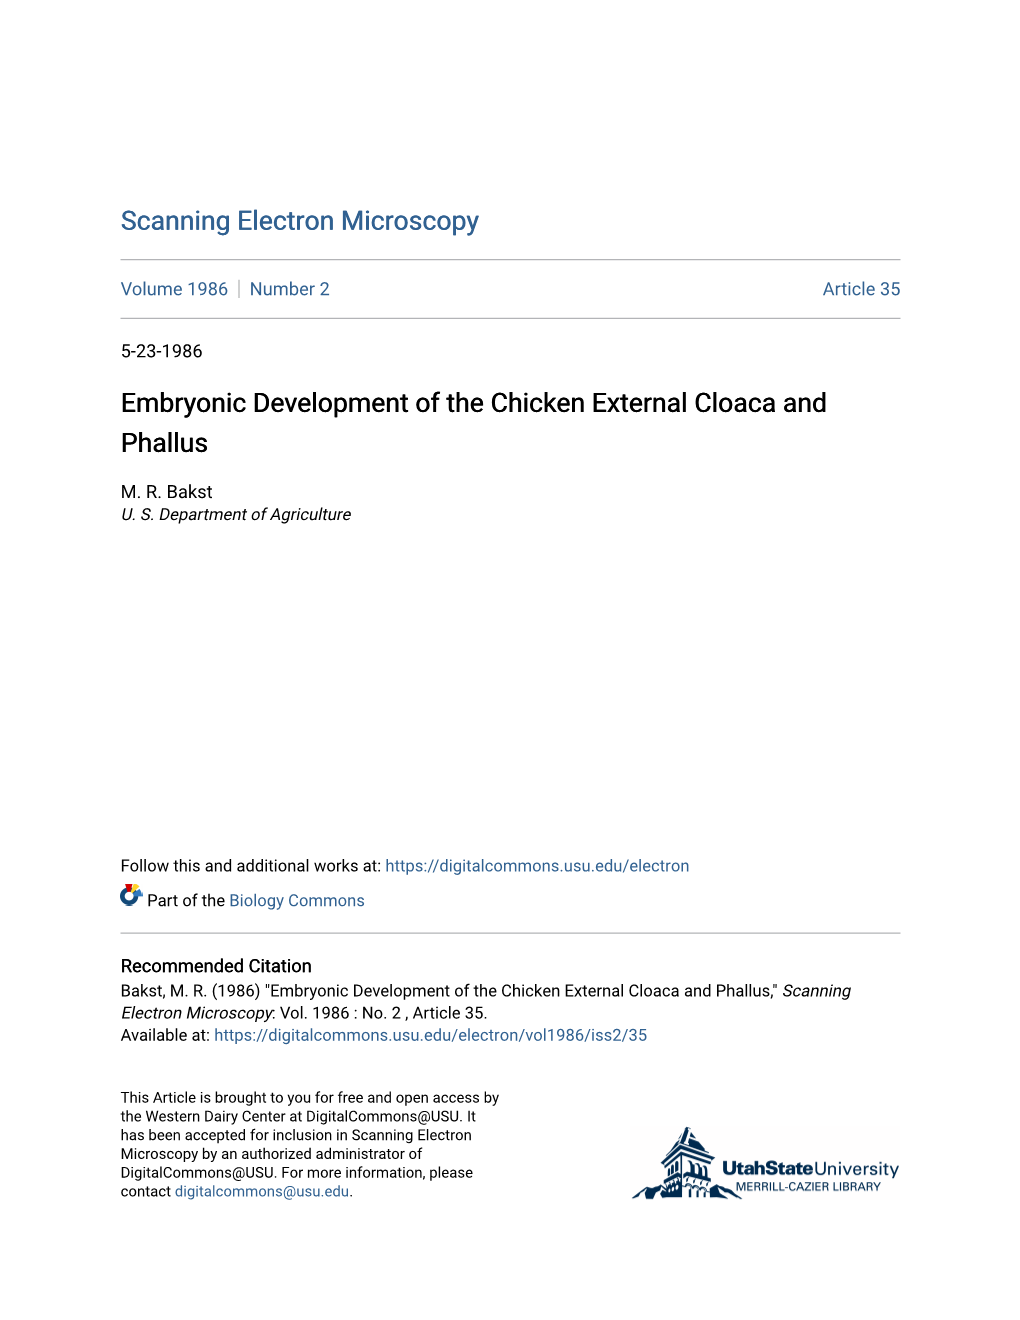 Embryonic Development of the Chicken External Cloaca and Phallus